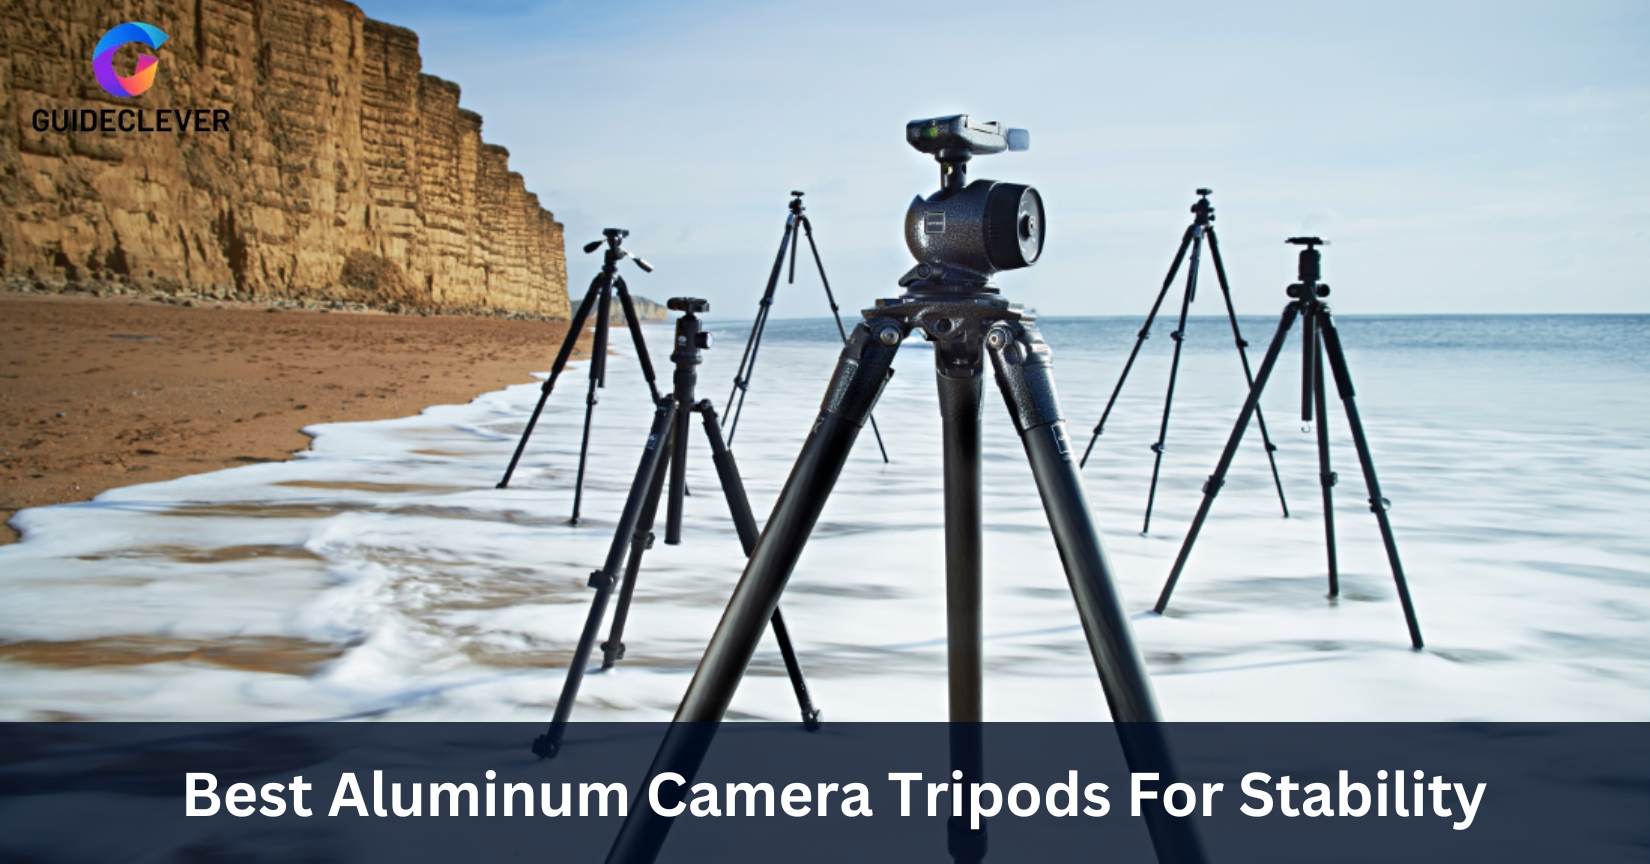 Best Aluminum Camera Tripods For Stability